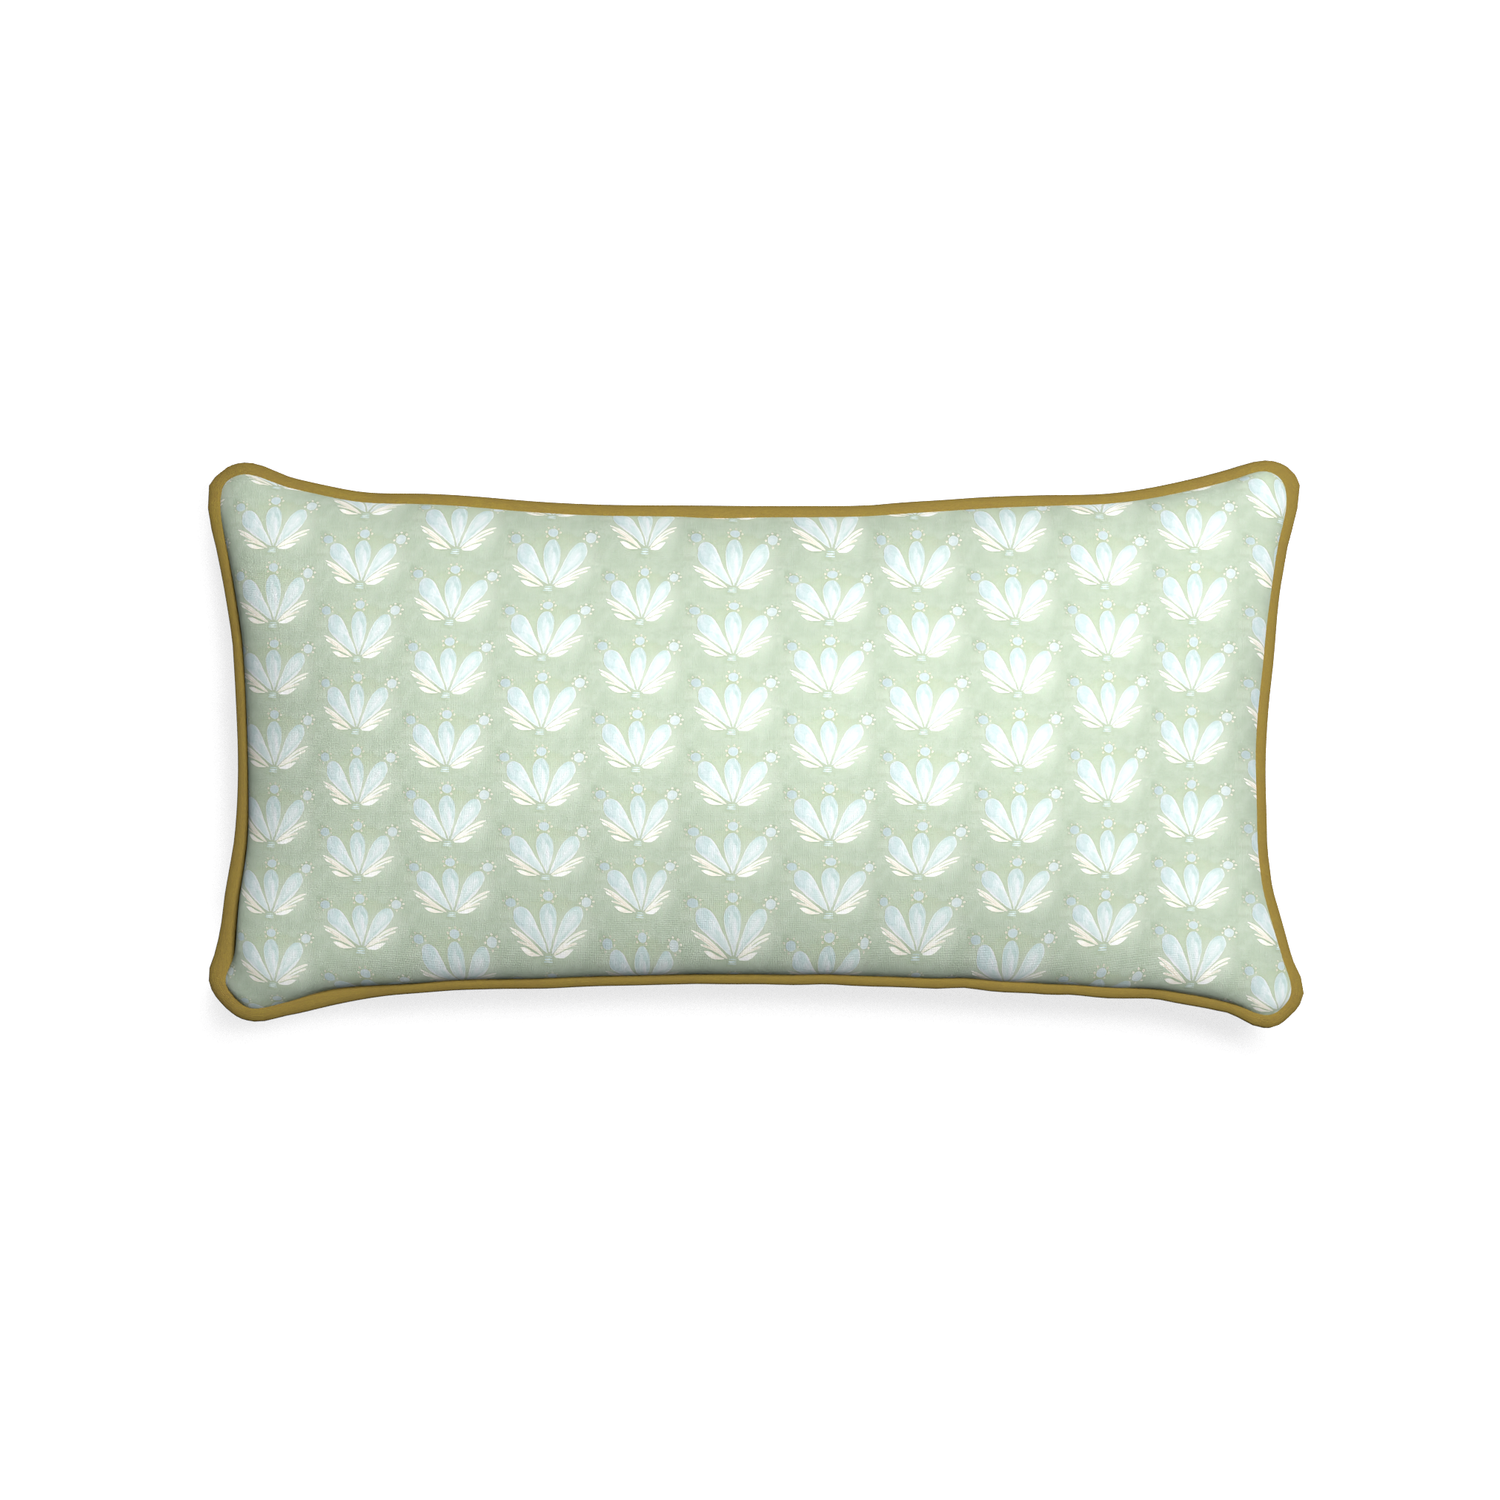 Midi-lumbar serena sea salt custom blue & green floral drop repeatpillow with c piping on white background